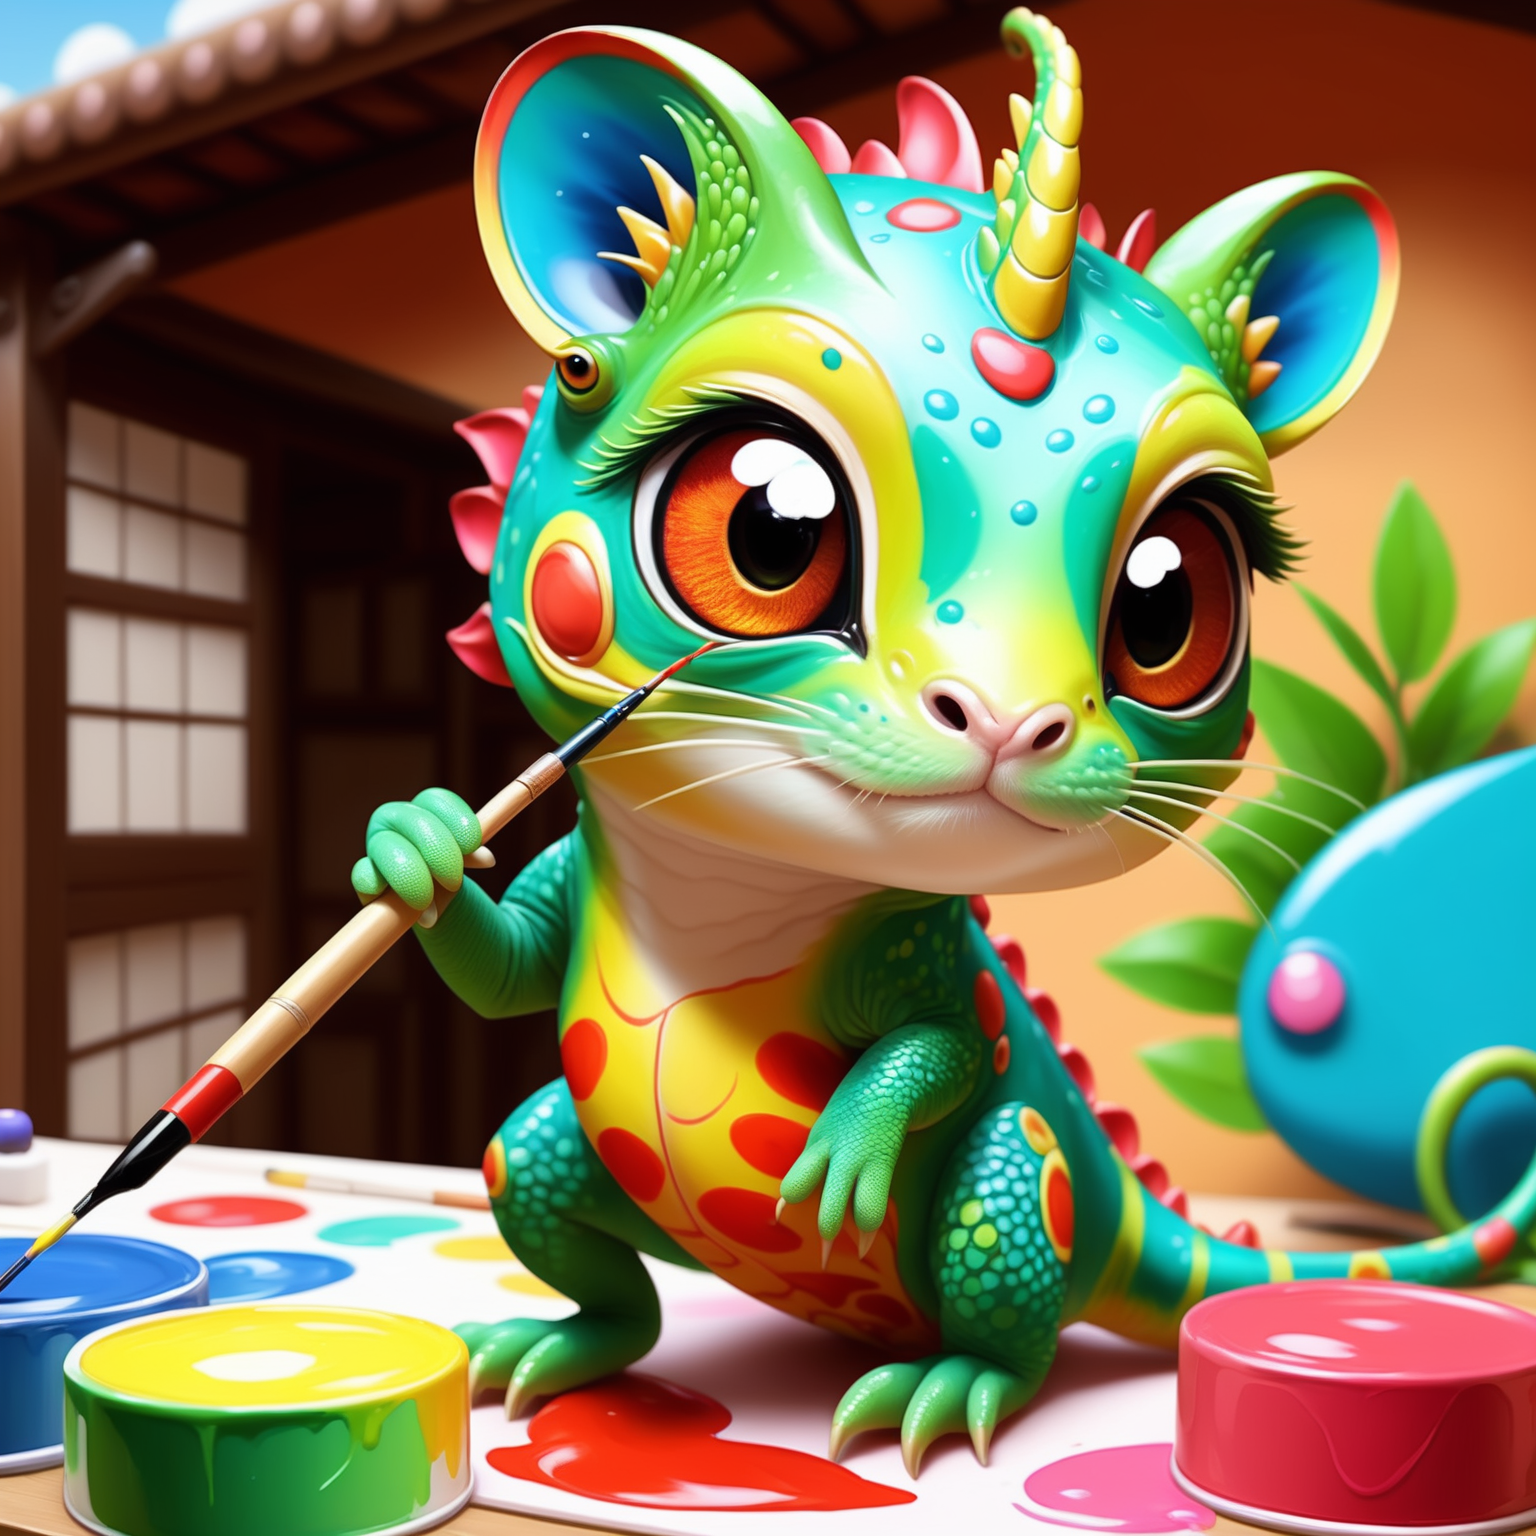 Kawaii Chameleon Painter changing its body colors to match its vibrant painting. Render this in an anime style, focusing o...